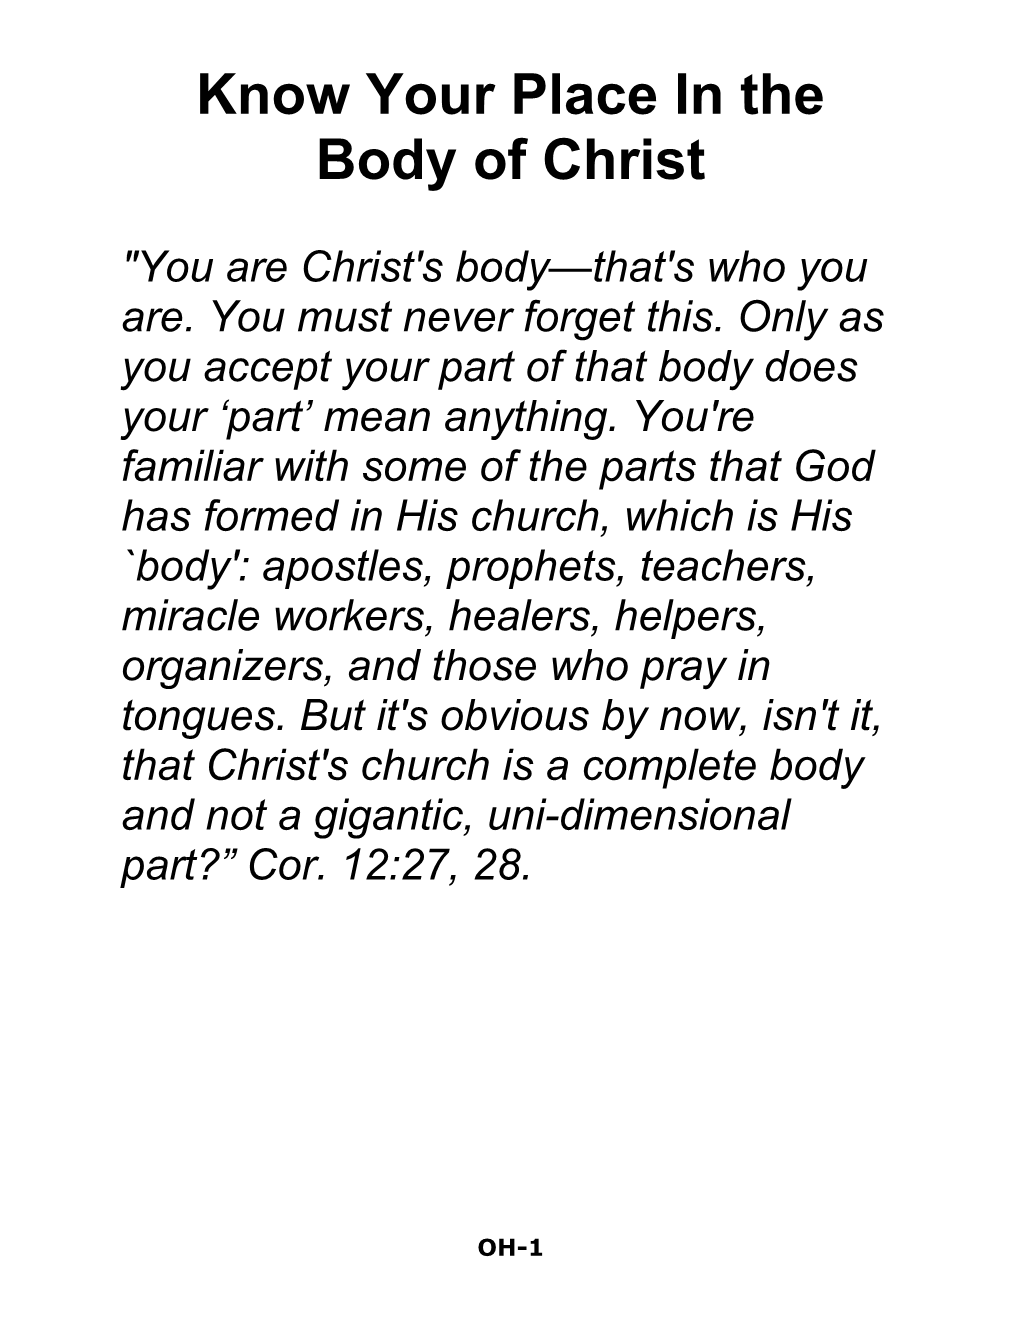 Know Your Place in the Body of Christ